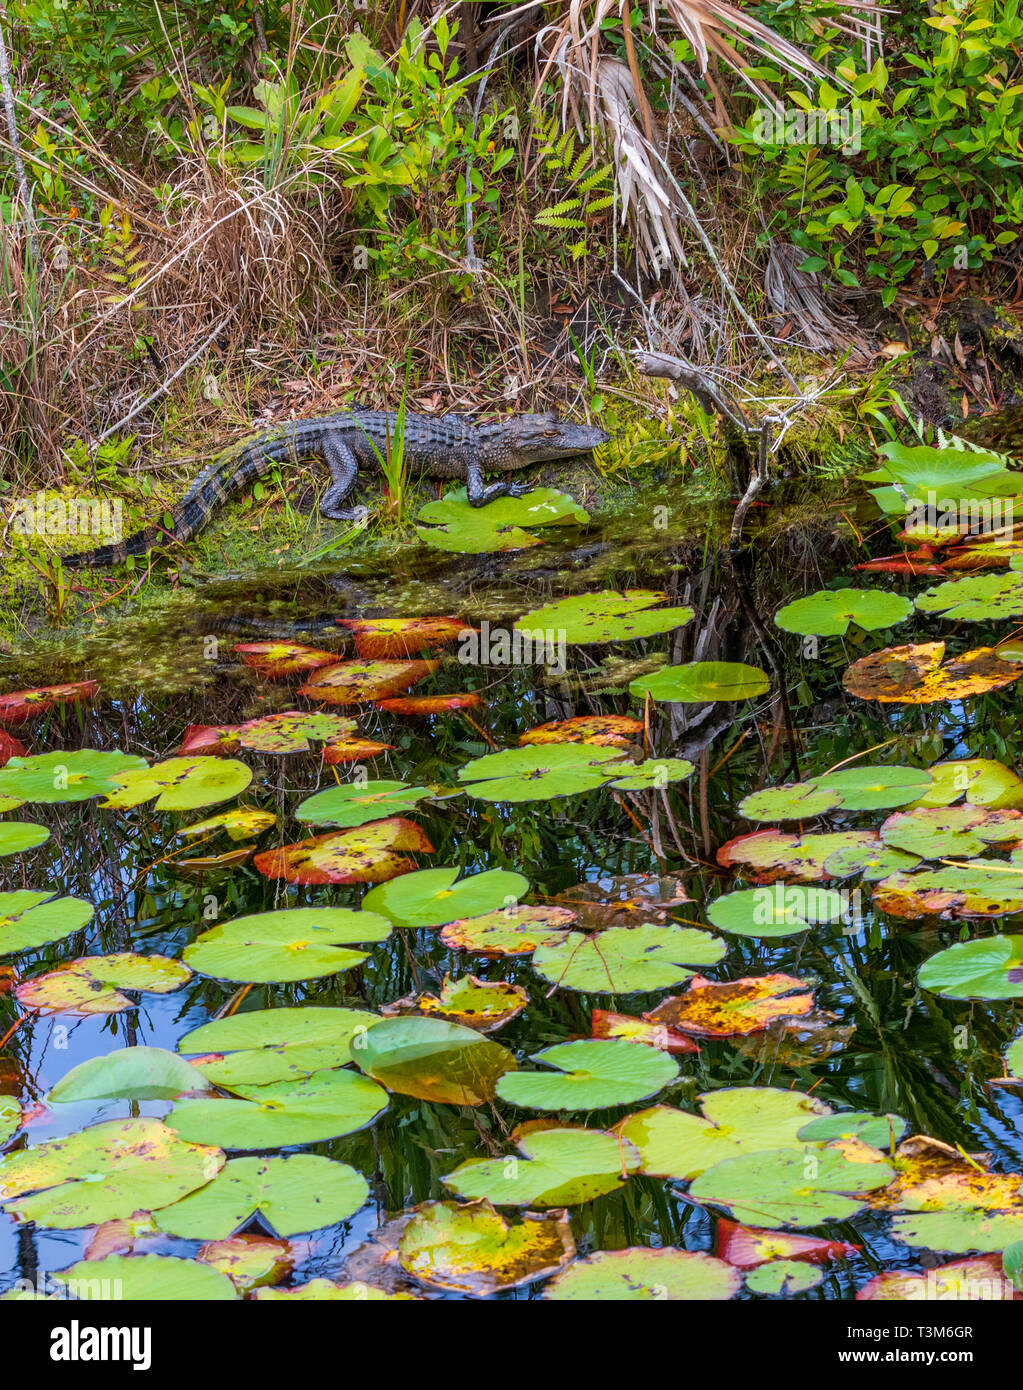 Small American alligator on  bank of okefenokee swamp, with lily pads in foreground.  Vertical image. Stock Photo